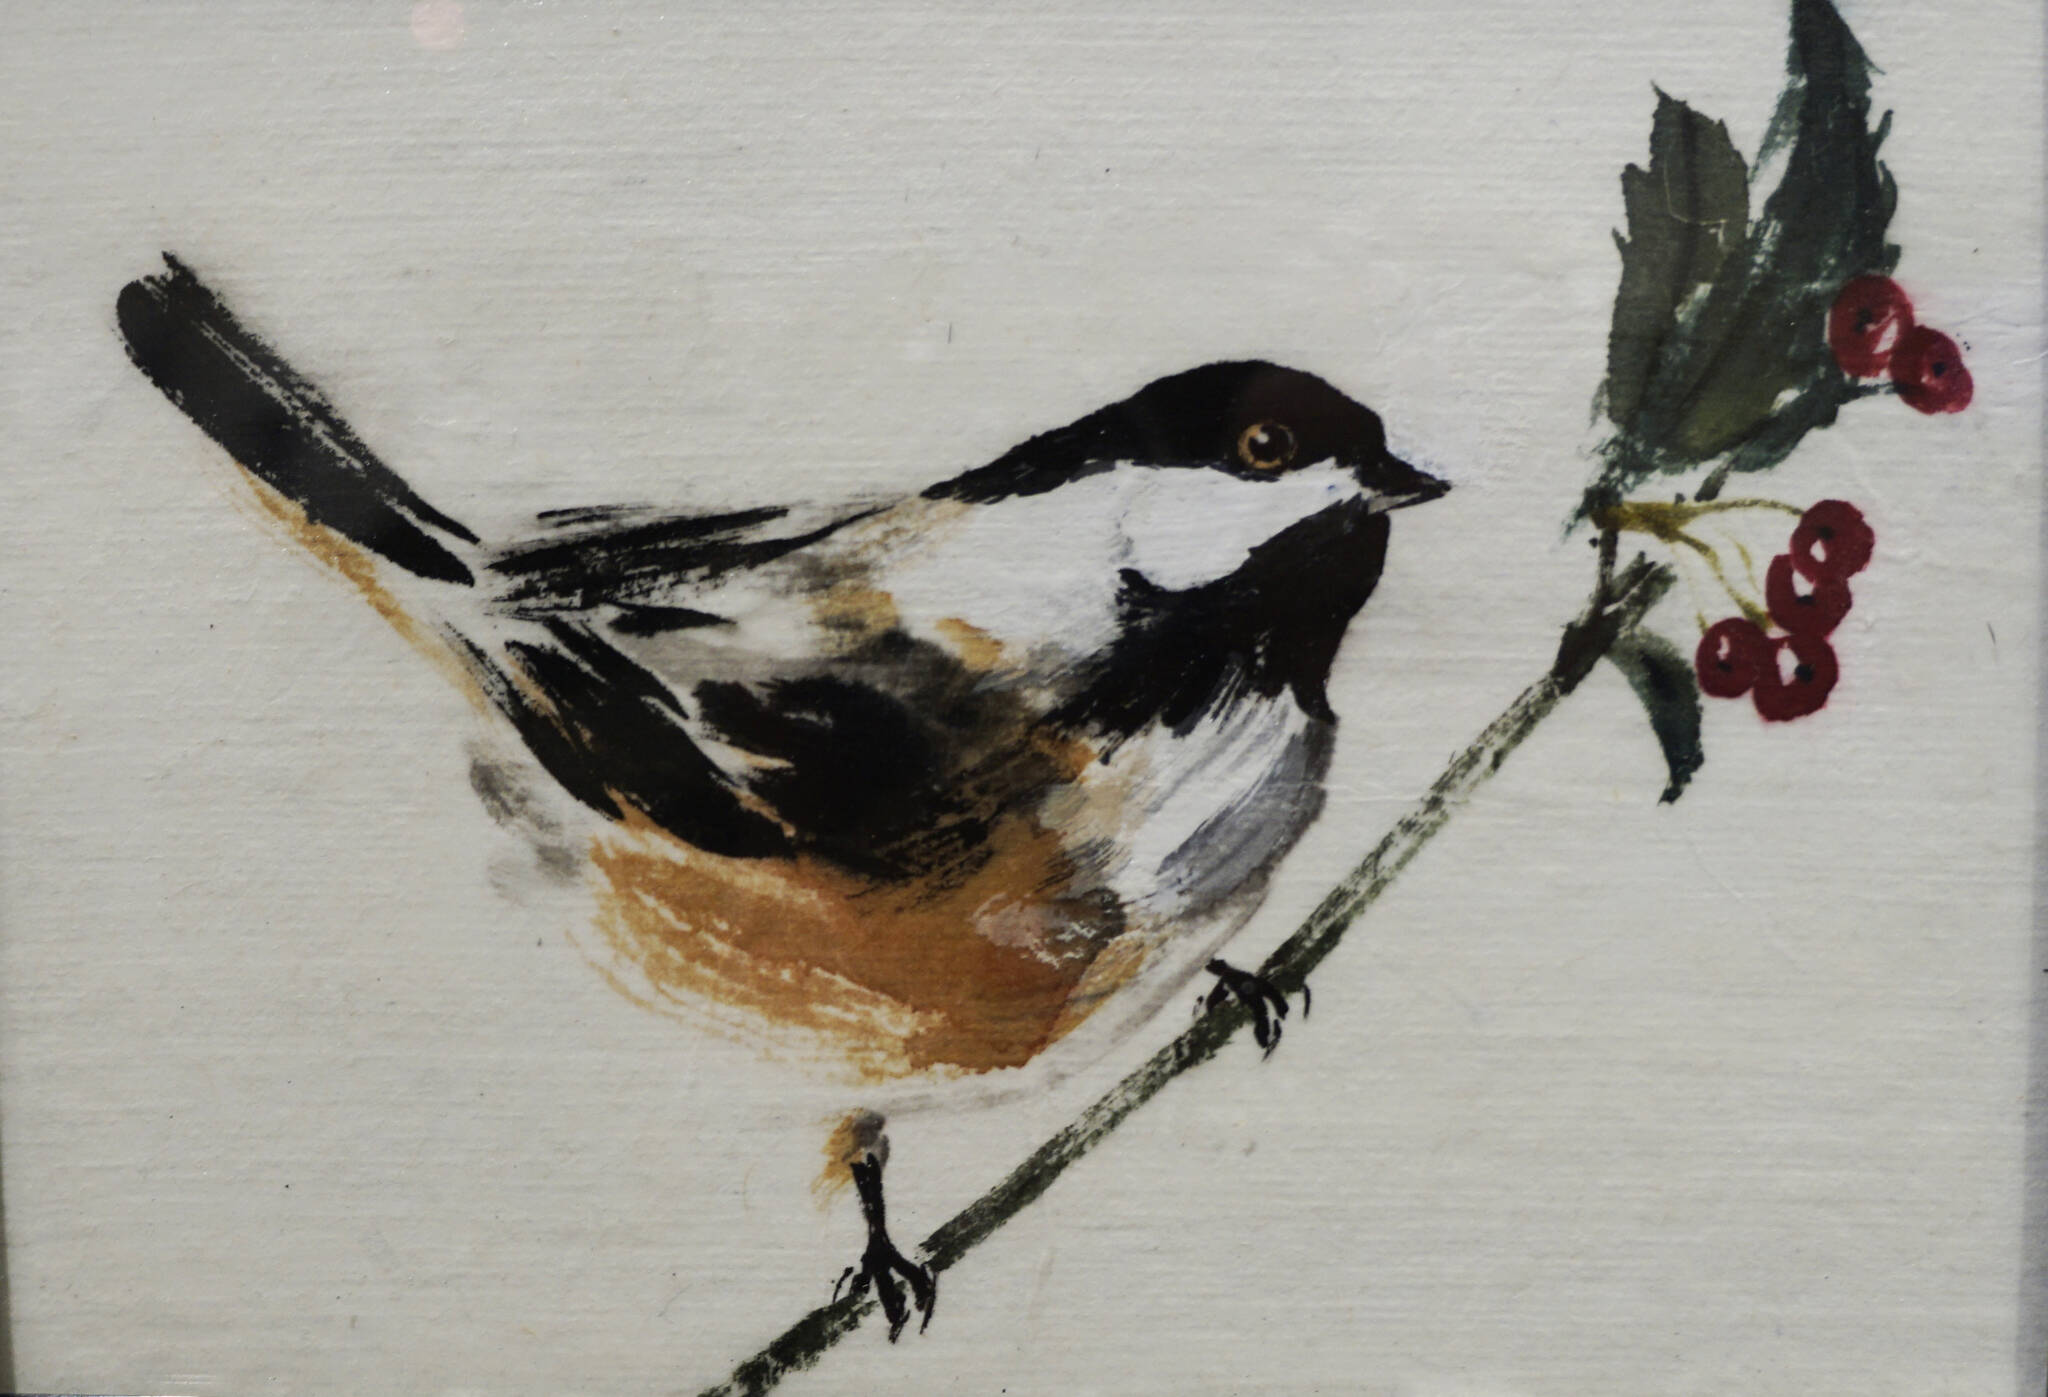 Sharlene Cline’s “Black-capped Chickadee and Holly” is one of the works showing in the Homer Council on the Arts “Fun wtih 5x7” show through Dec. 22, 2021, at the gallery in Homer, Alaska. (Photo by Michael Armstrong/Homer News)